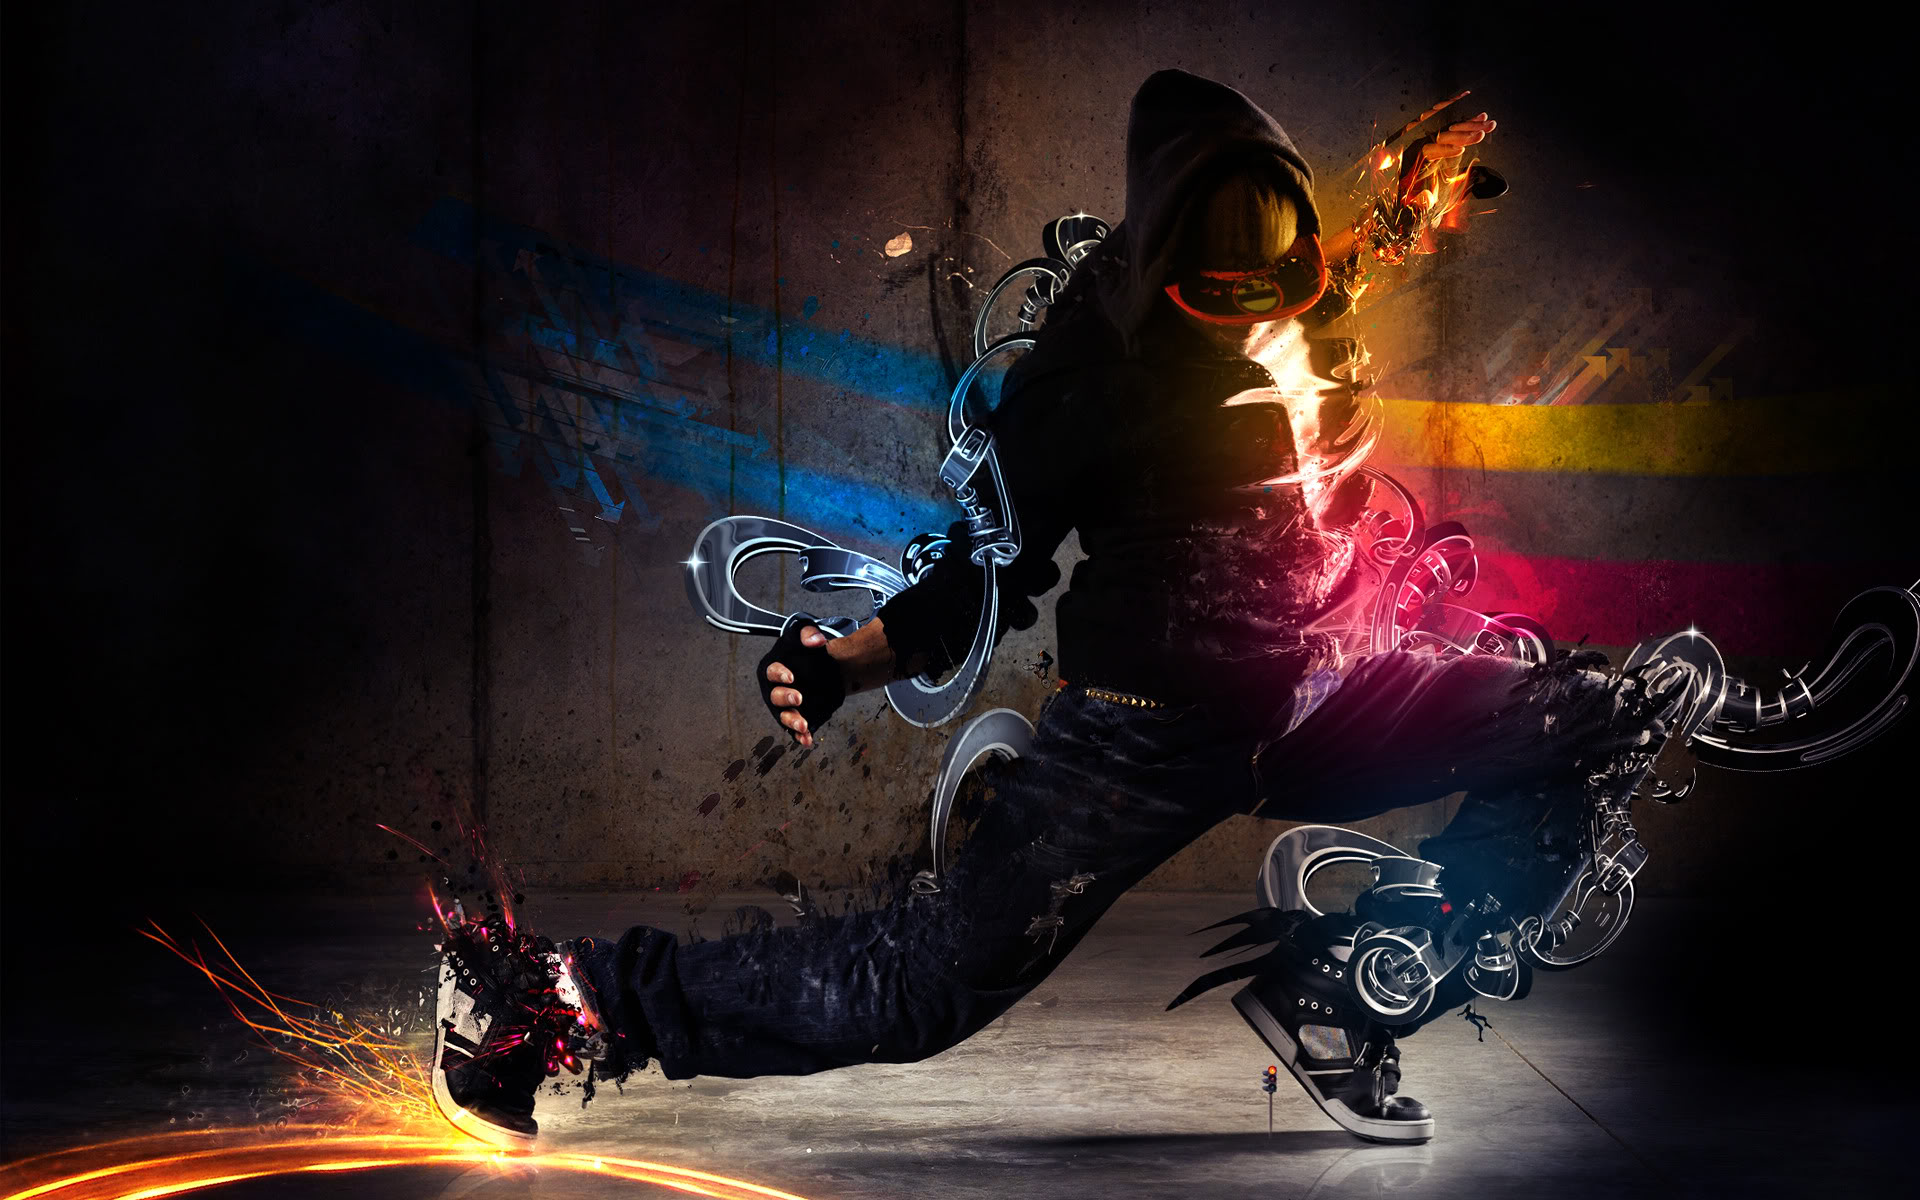 Download Cool HD Wallpapers For Boys Break Dance pictures in high 1920x1200